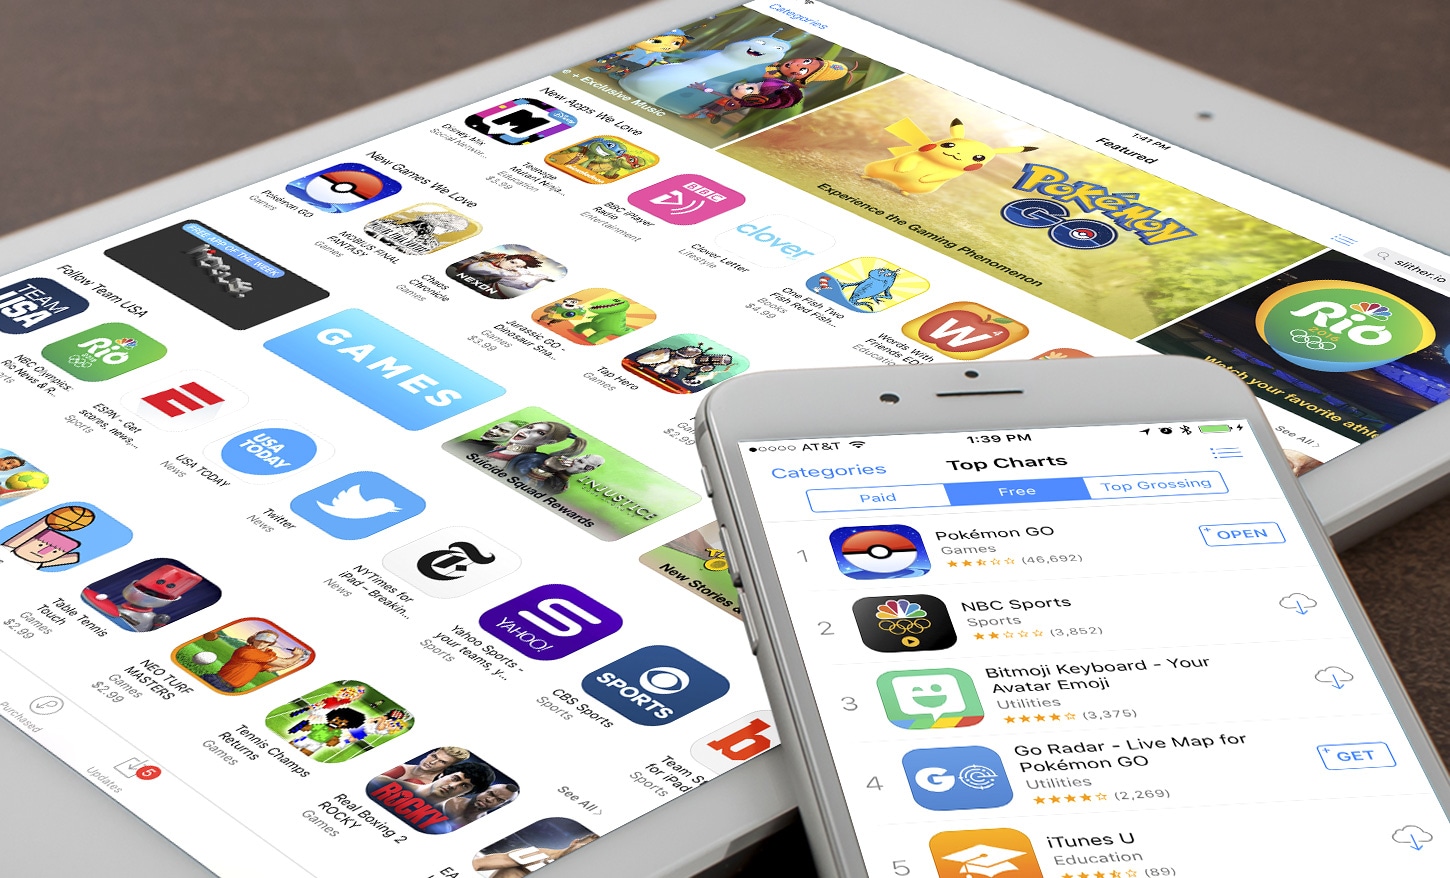 Research shows that time spent on apps is stagnating, but downloads and revenue remain high